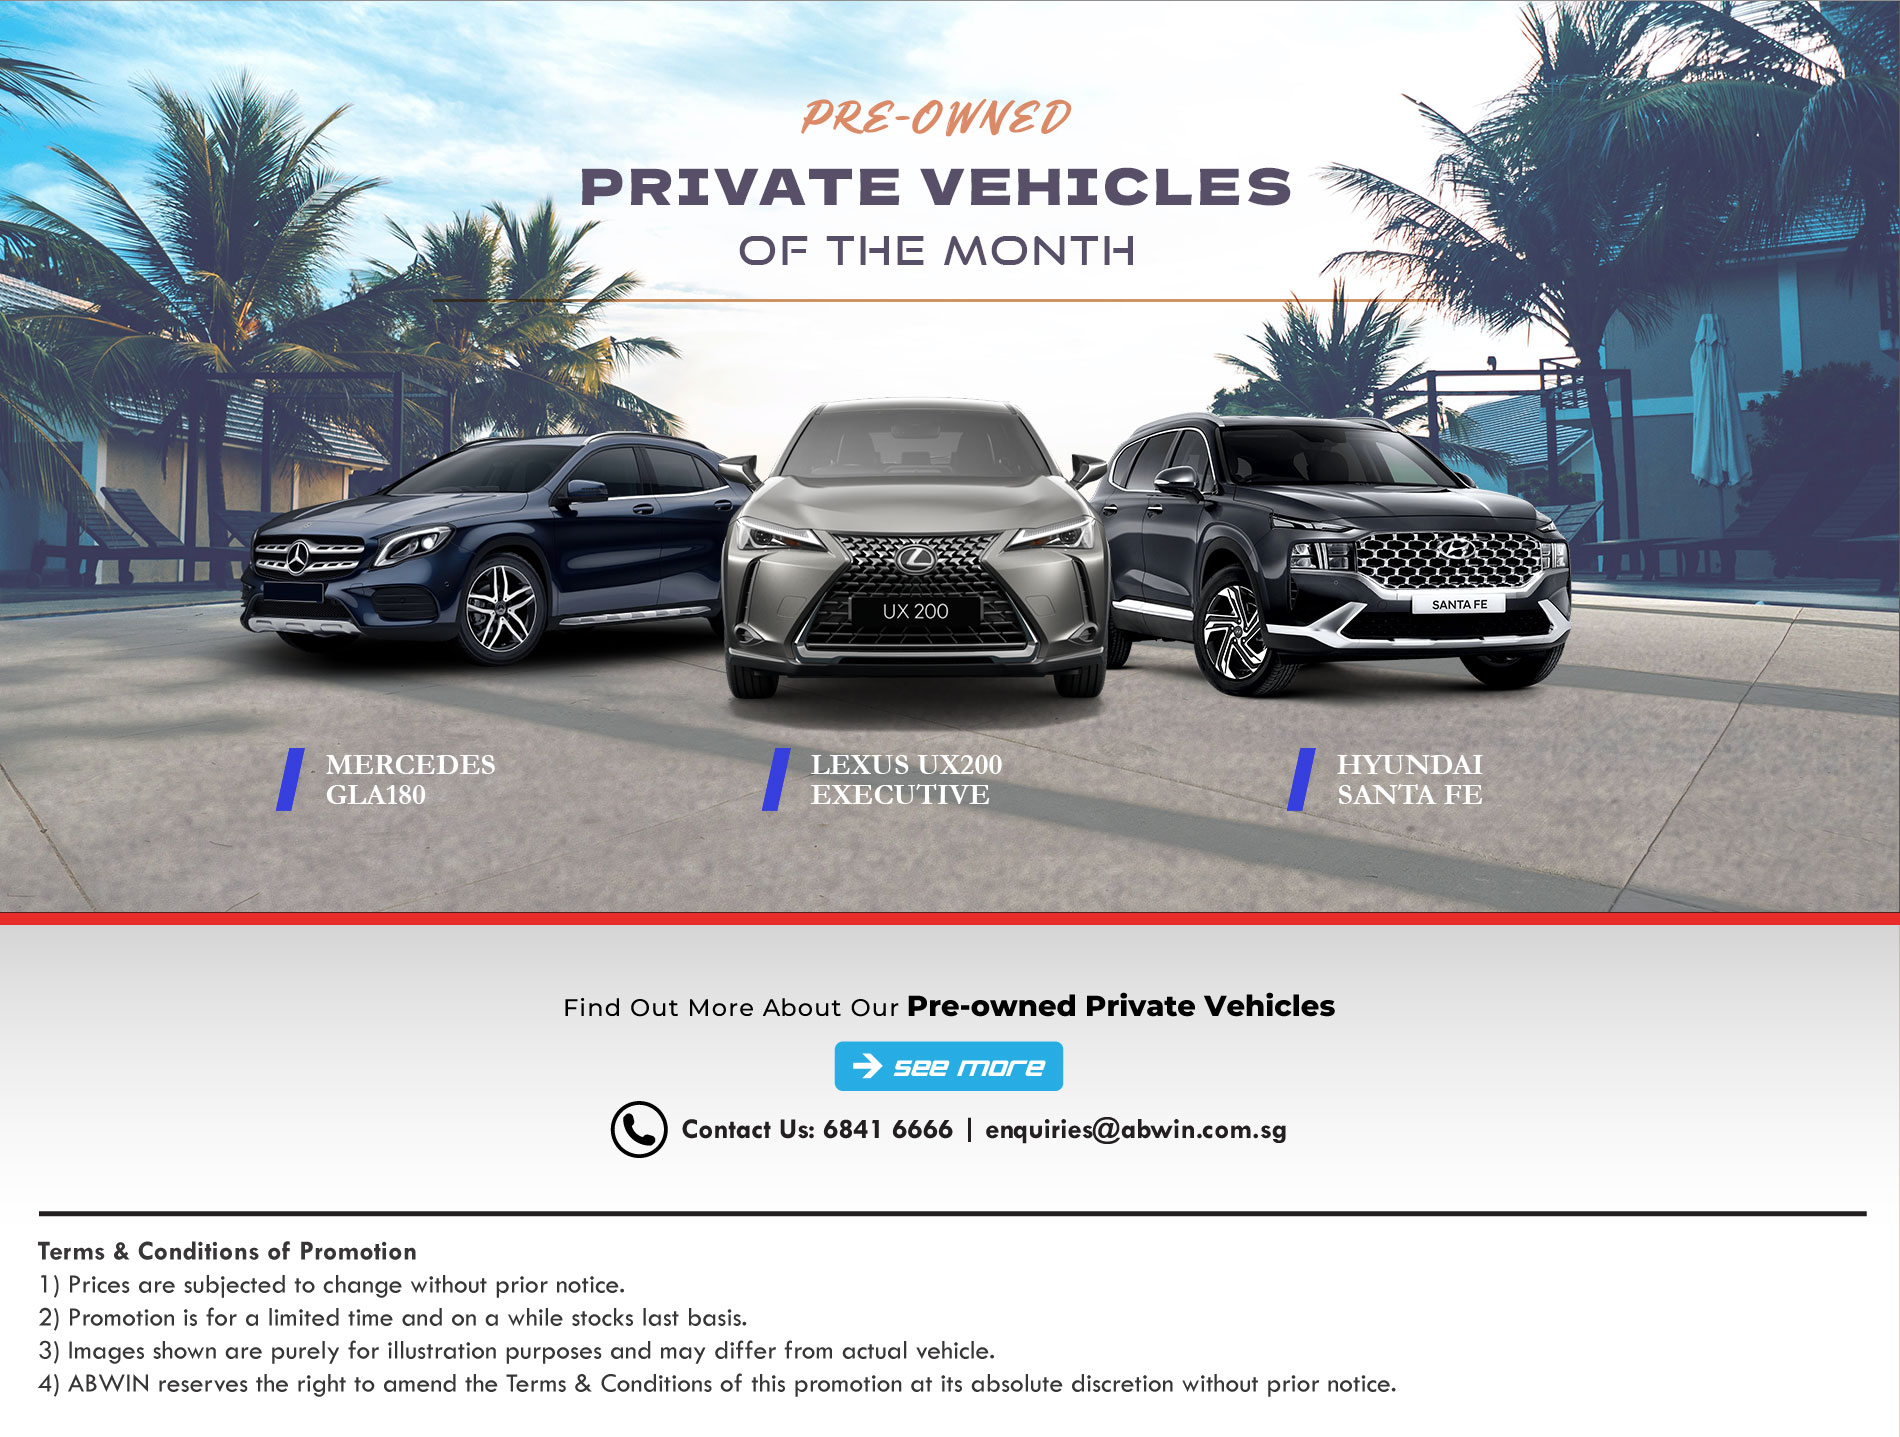 Pre-owned Private Vehicle Of The Month